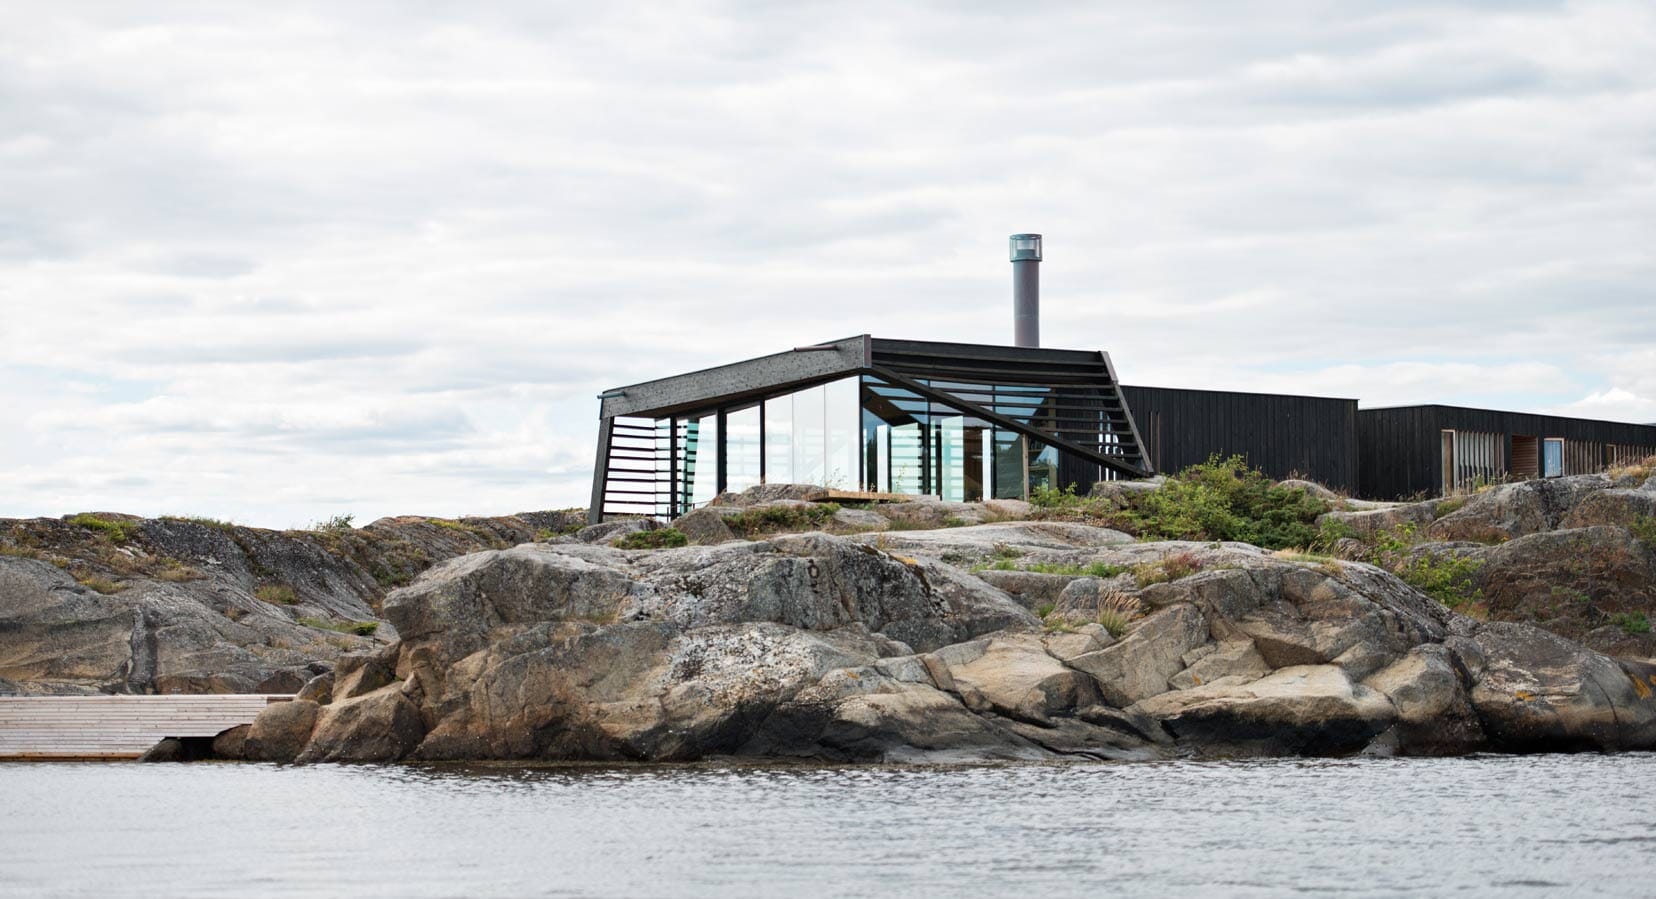 Poetic and Practical: The Lille Arøya Cabin By Lund Hagem